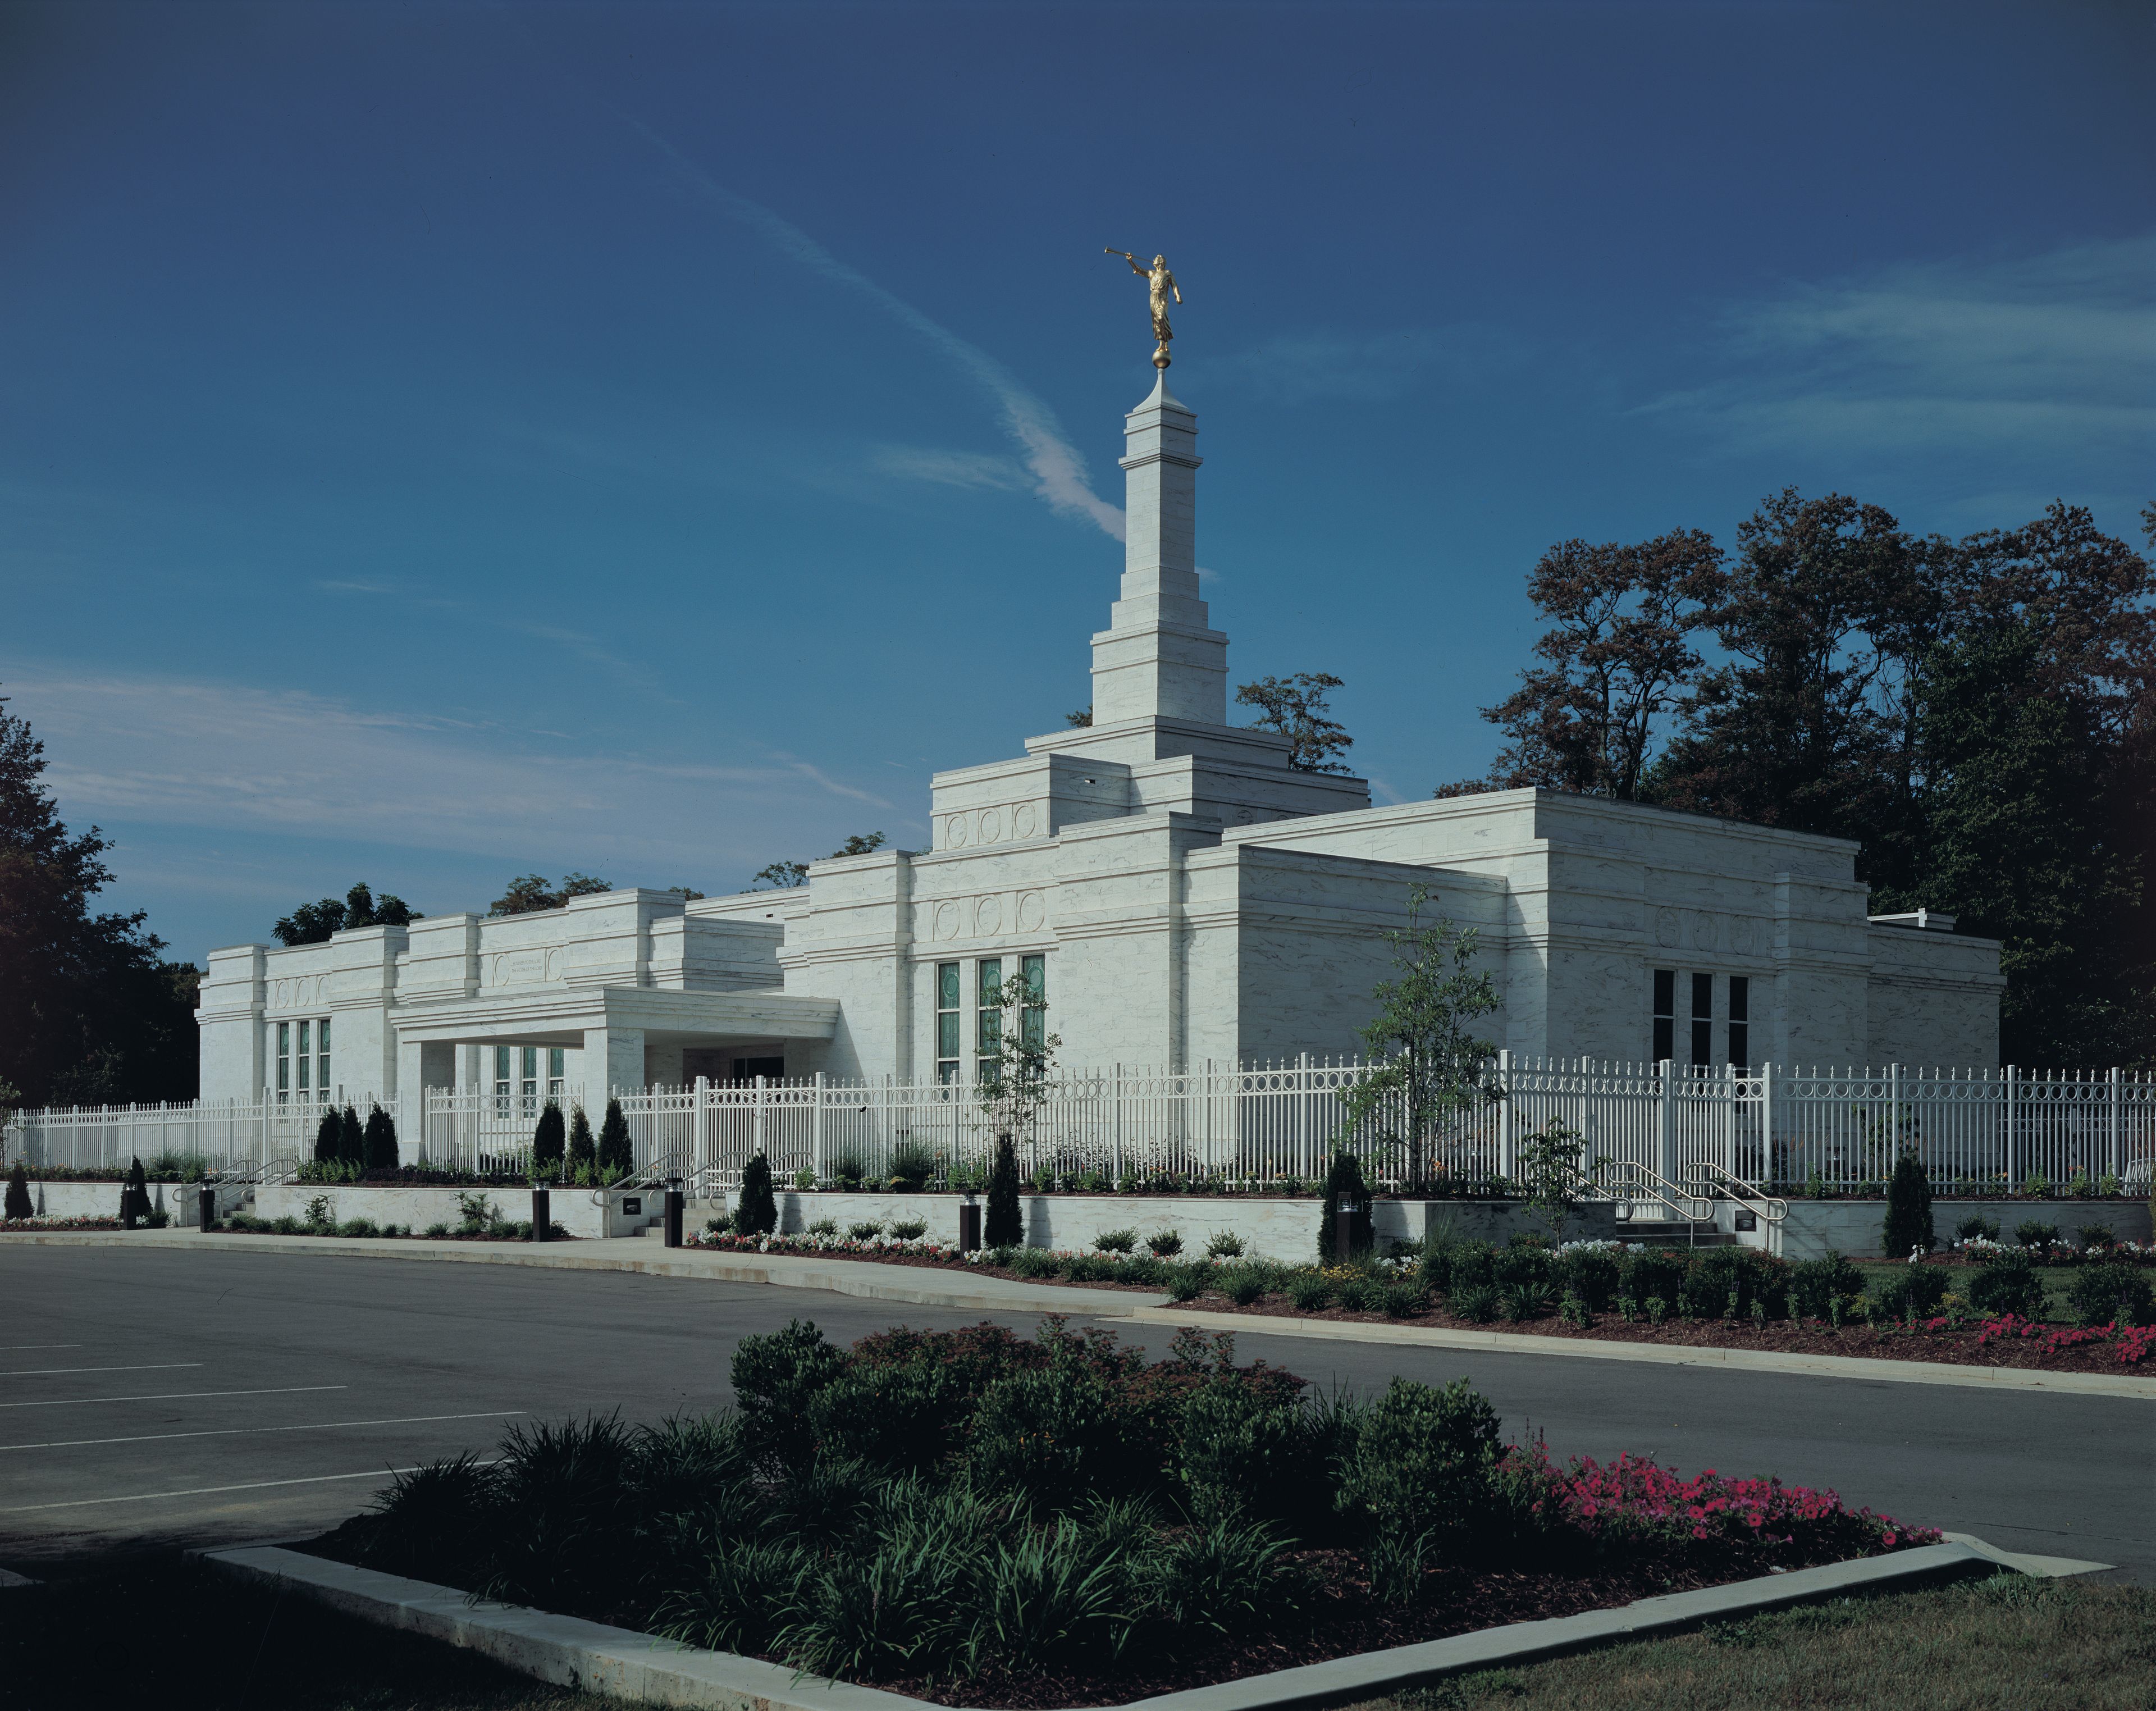 The entire Louisville Kentucky Temple, including the entrance and scenery.